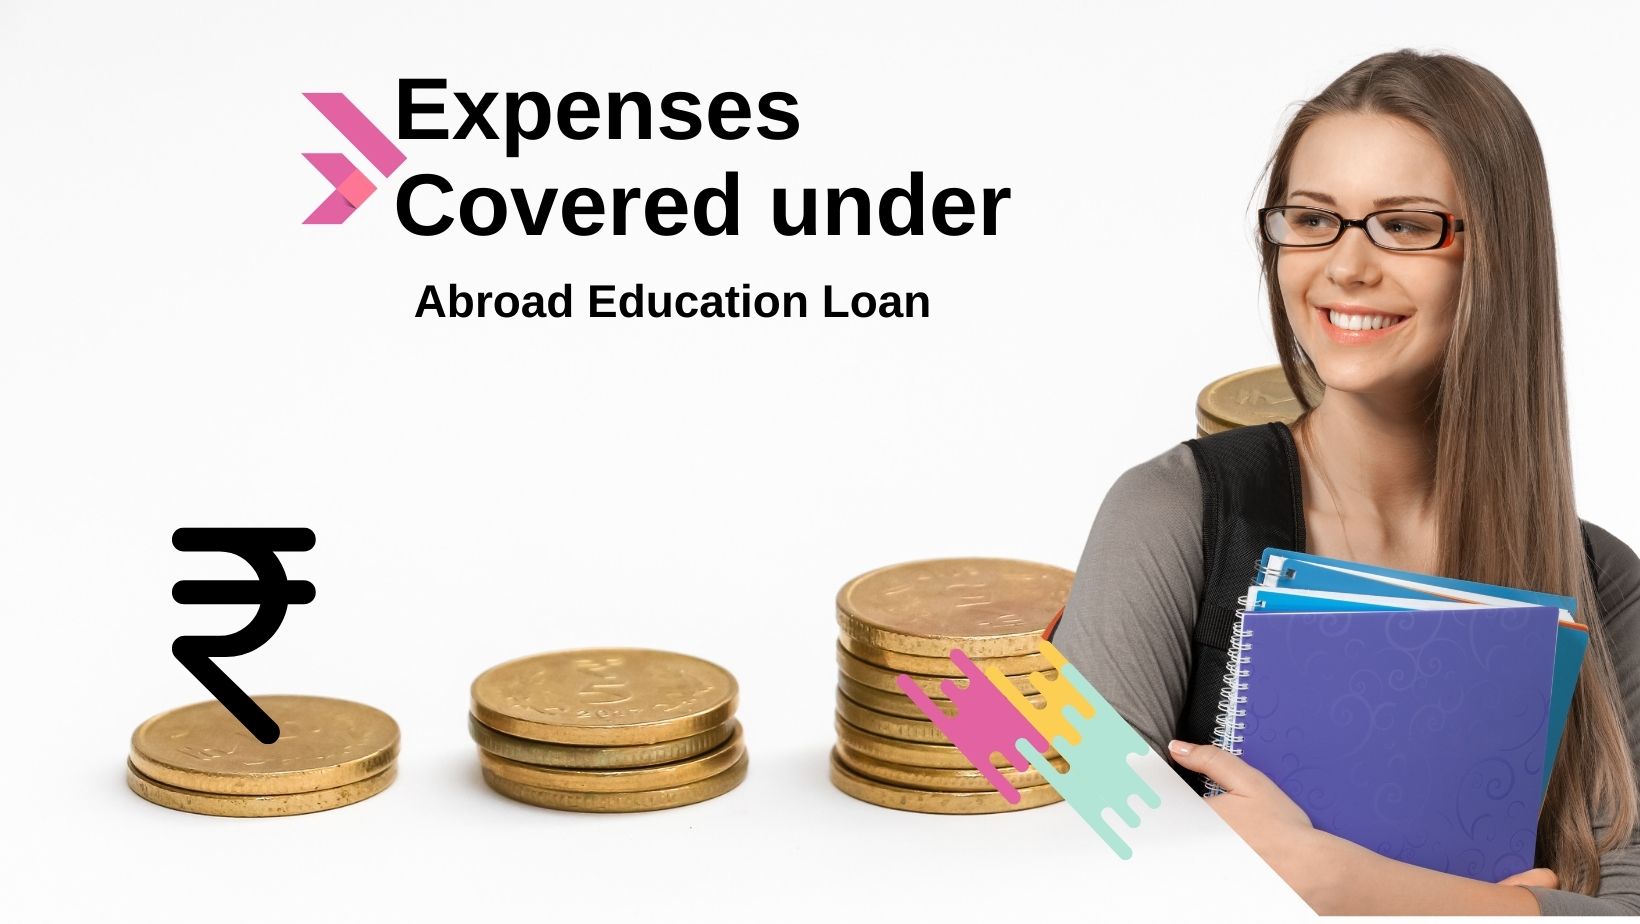 Expenses Covered Under Abroad Education Loan